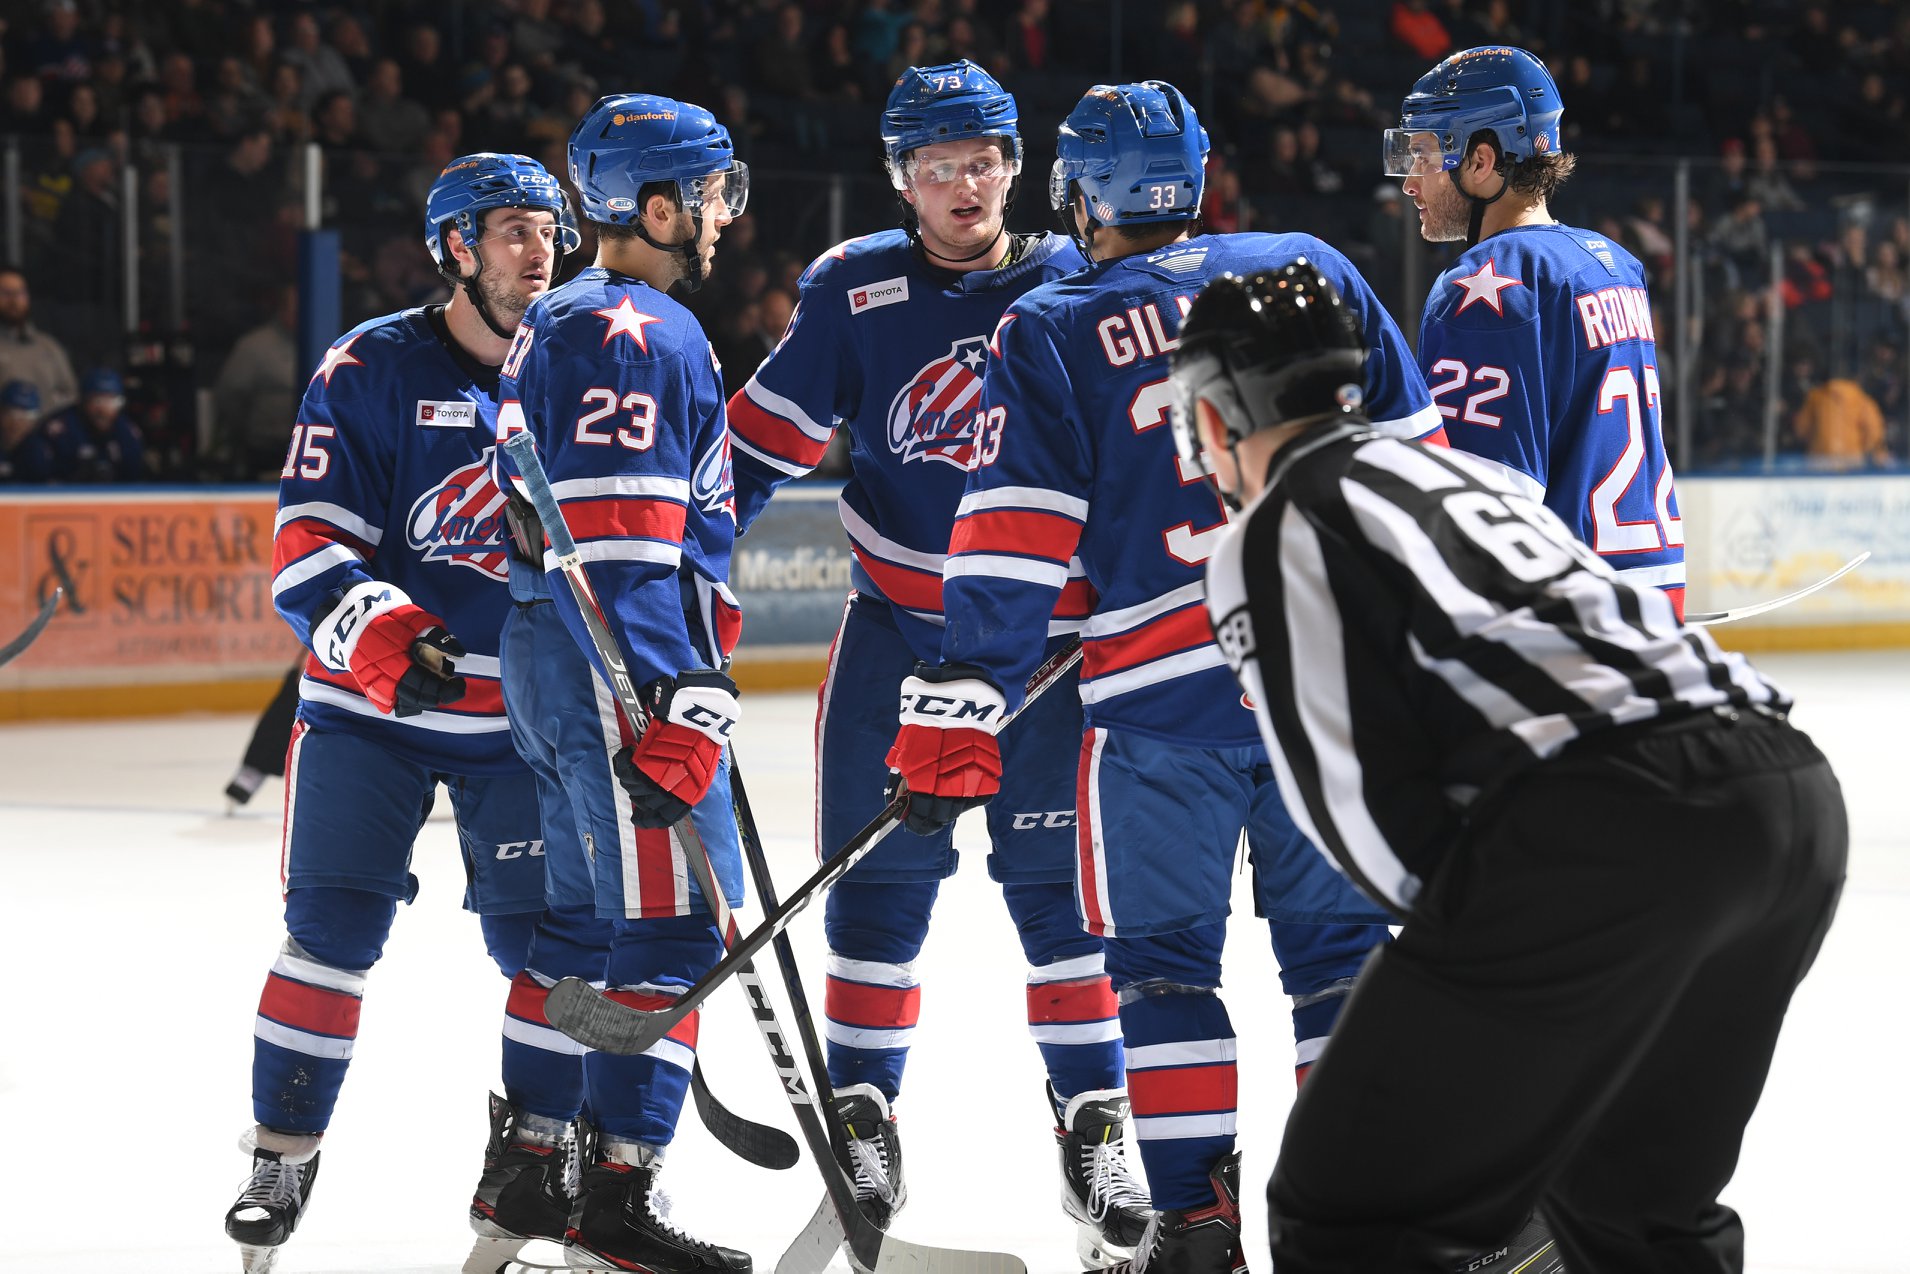 Weekend Preview: Amerks Need to End Another Streak